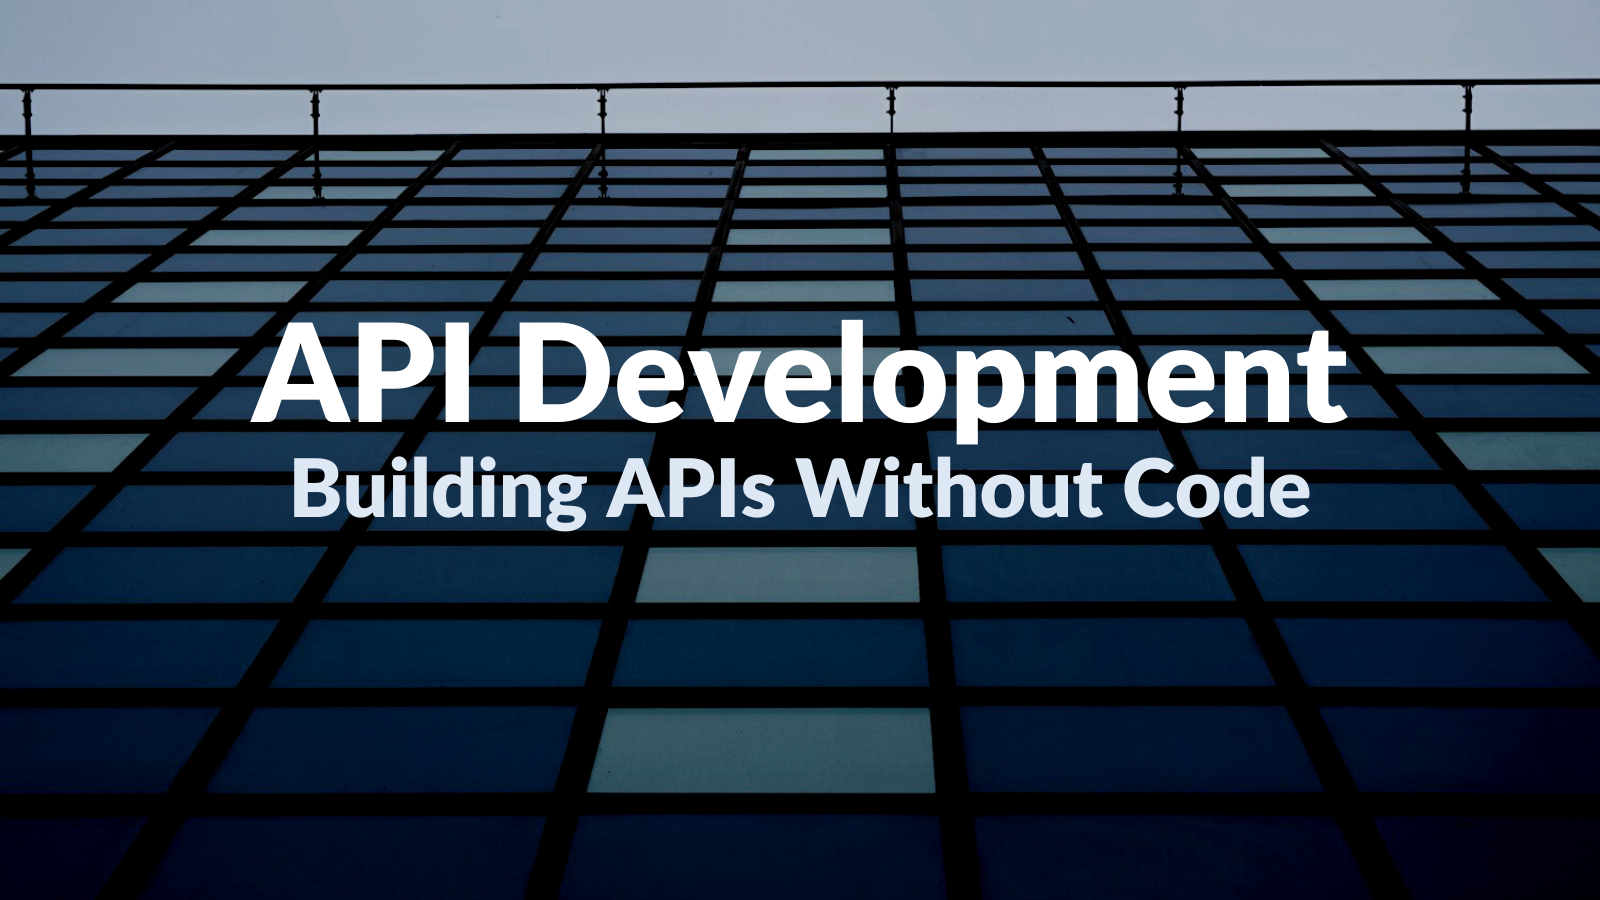 API Development: The Complete Guide for Building APIs Without Code